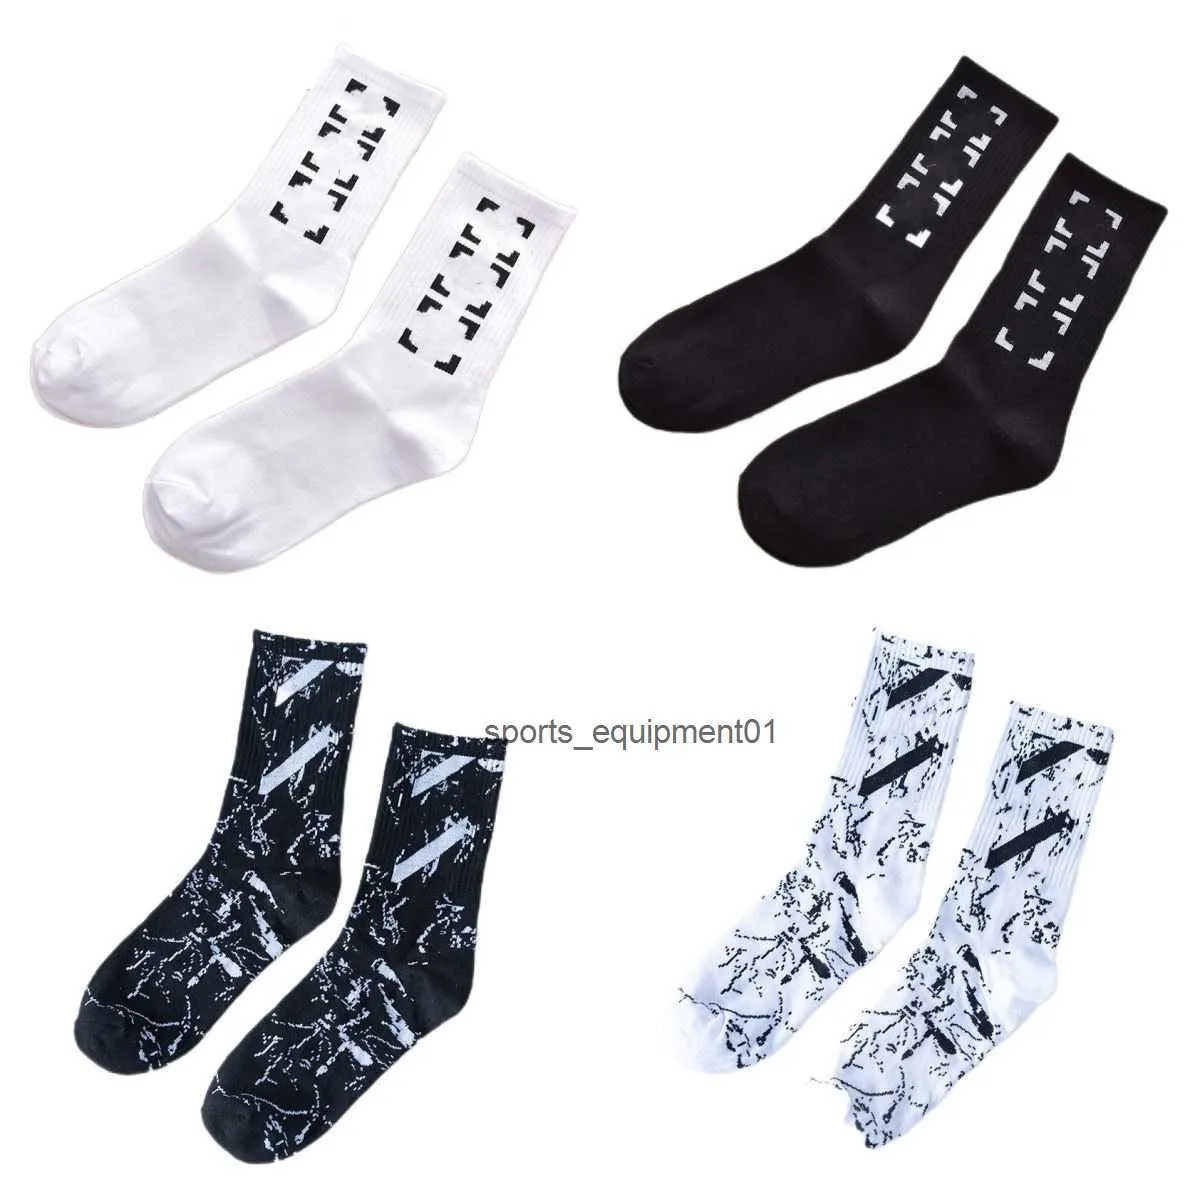 High Quality Fashion Brand off Casual Cotton Socks Business Embroidery Mens Manufacturer Wholesale offf 1LDP